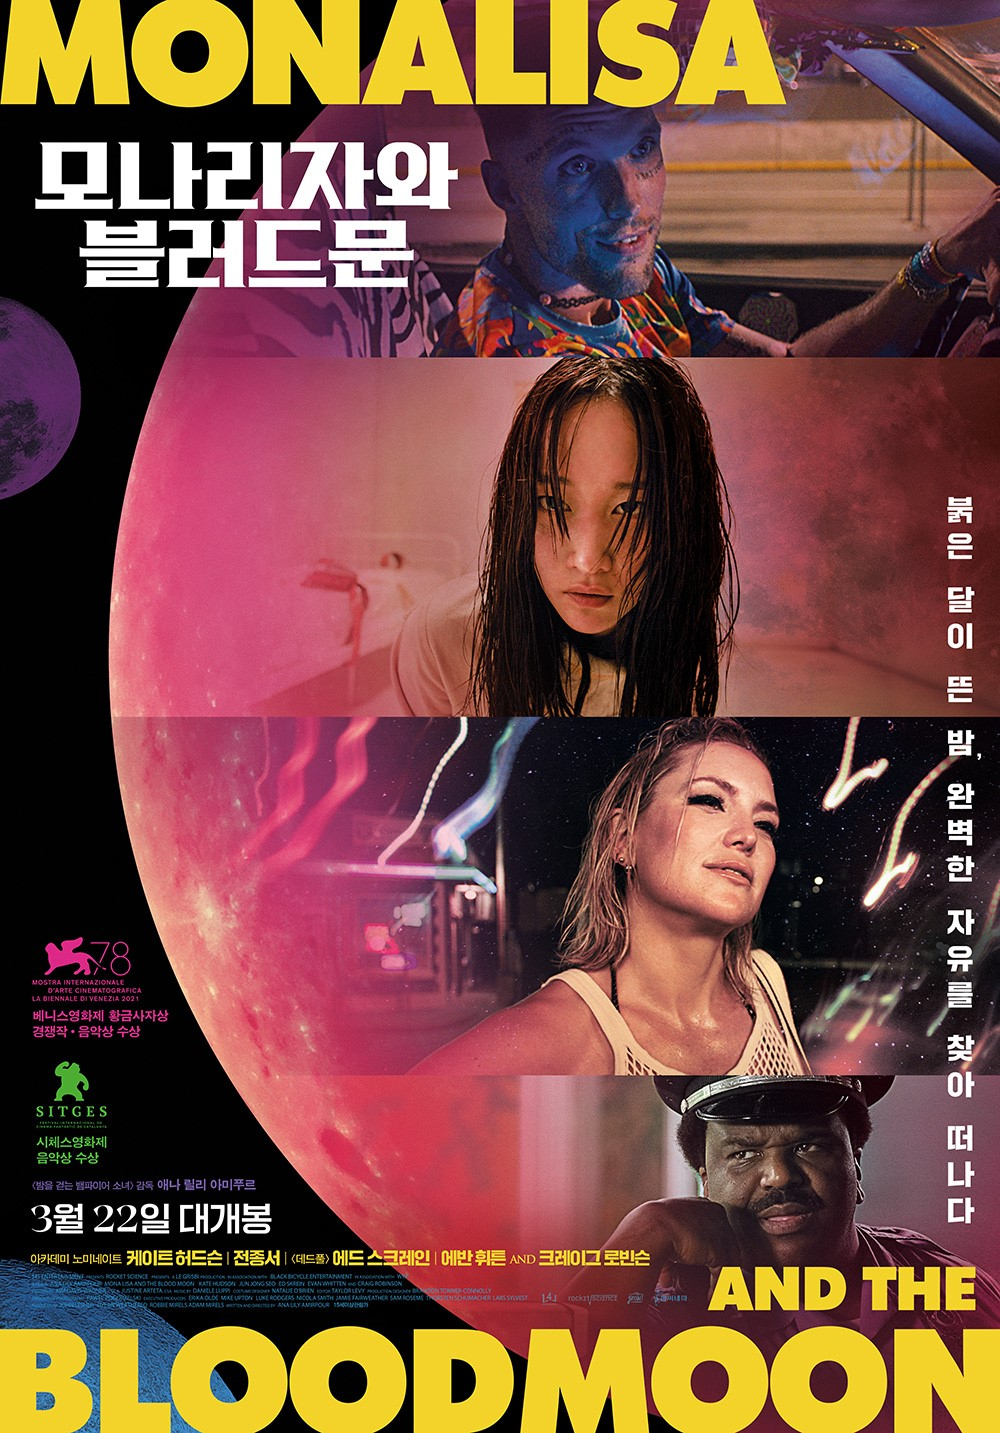 Jeon Jong-seo’s Hollywood debut film ‘Mona Lisa and Blood Moon’ to open